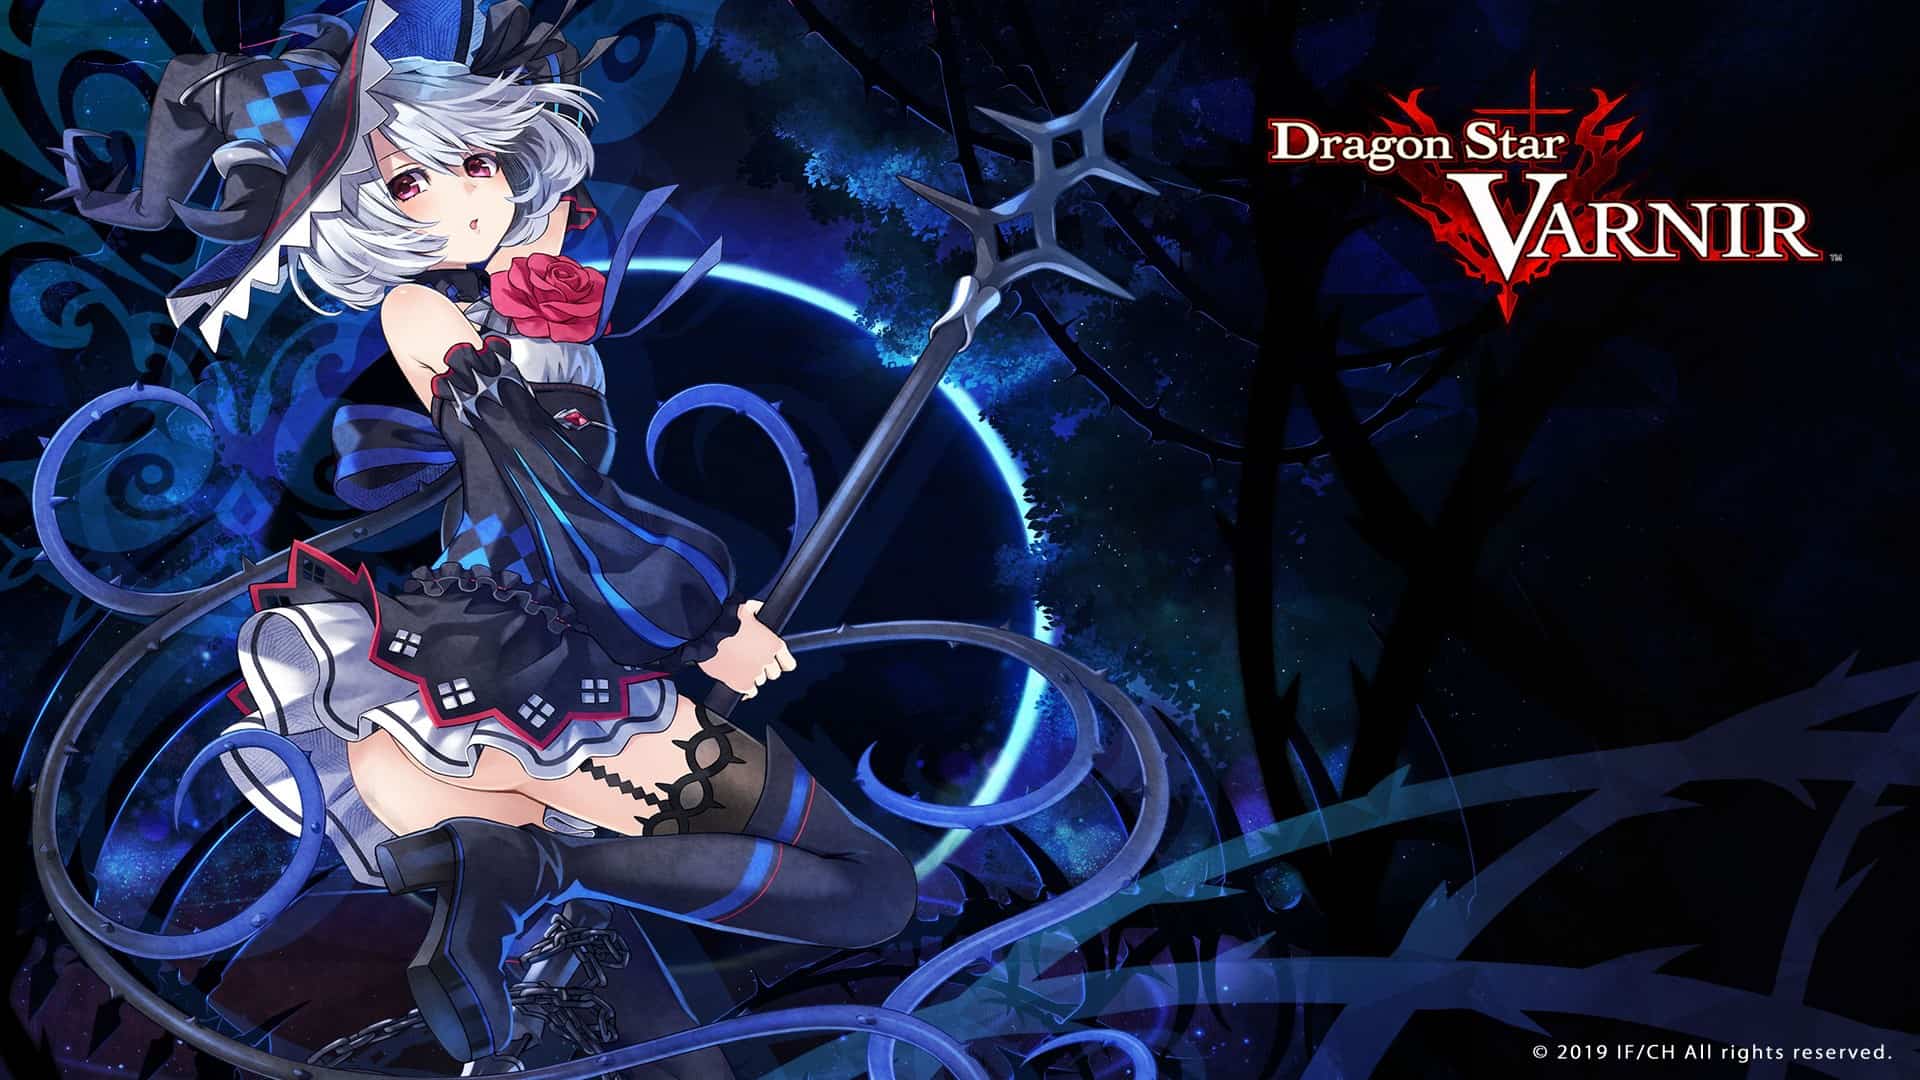 Dragon Star Varnir Is Now Available On PS4